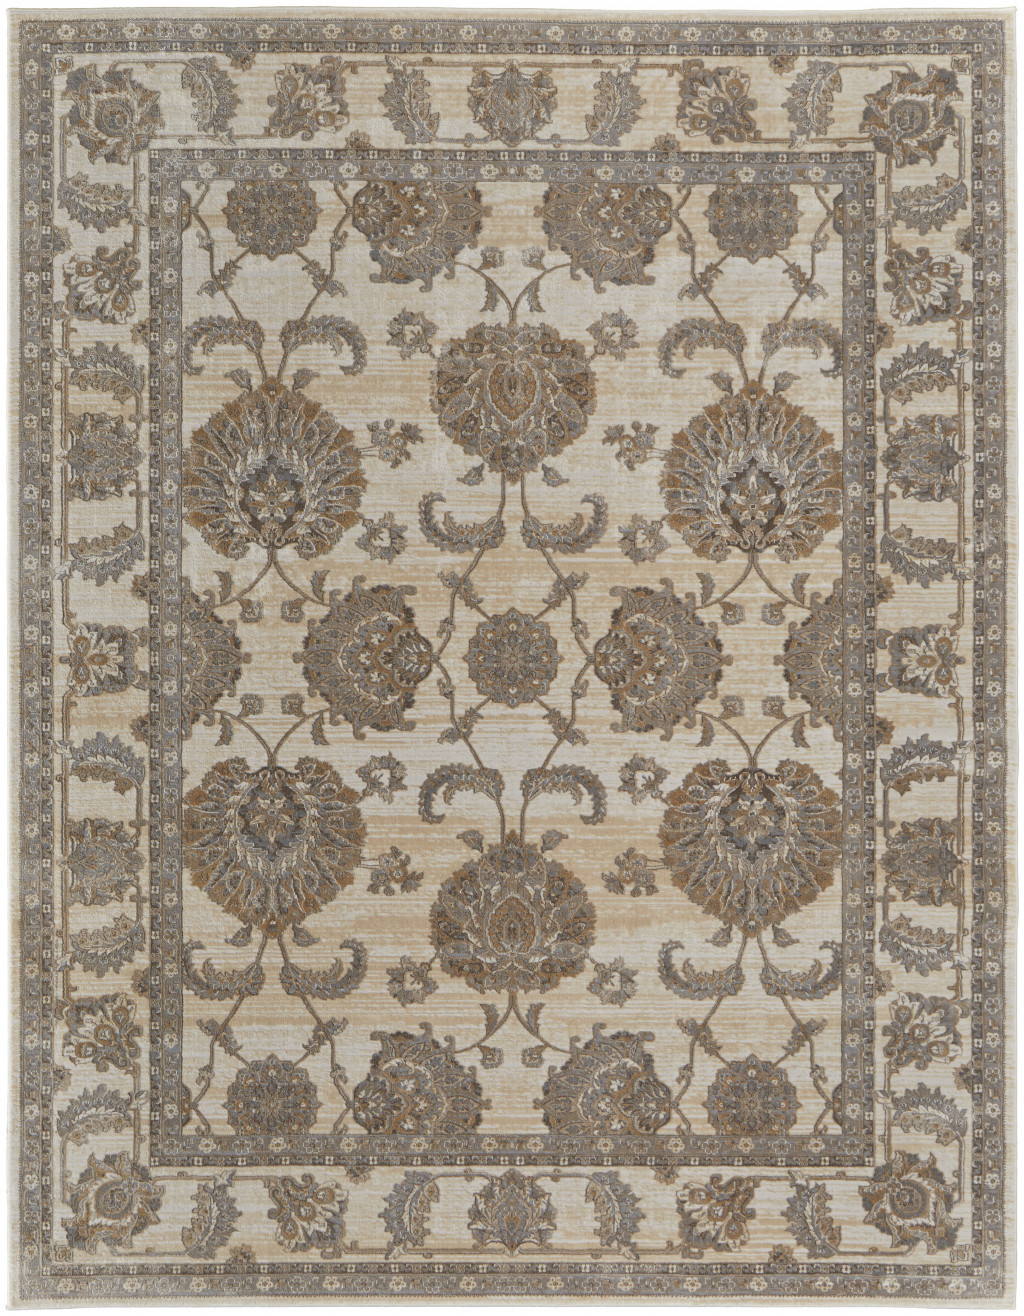 5' X 8' Tan Ivory And Brown Power Loom Area Rug-515499-1